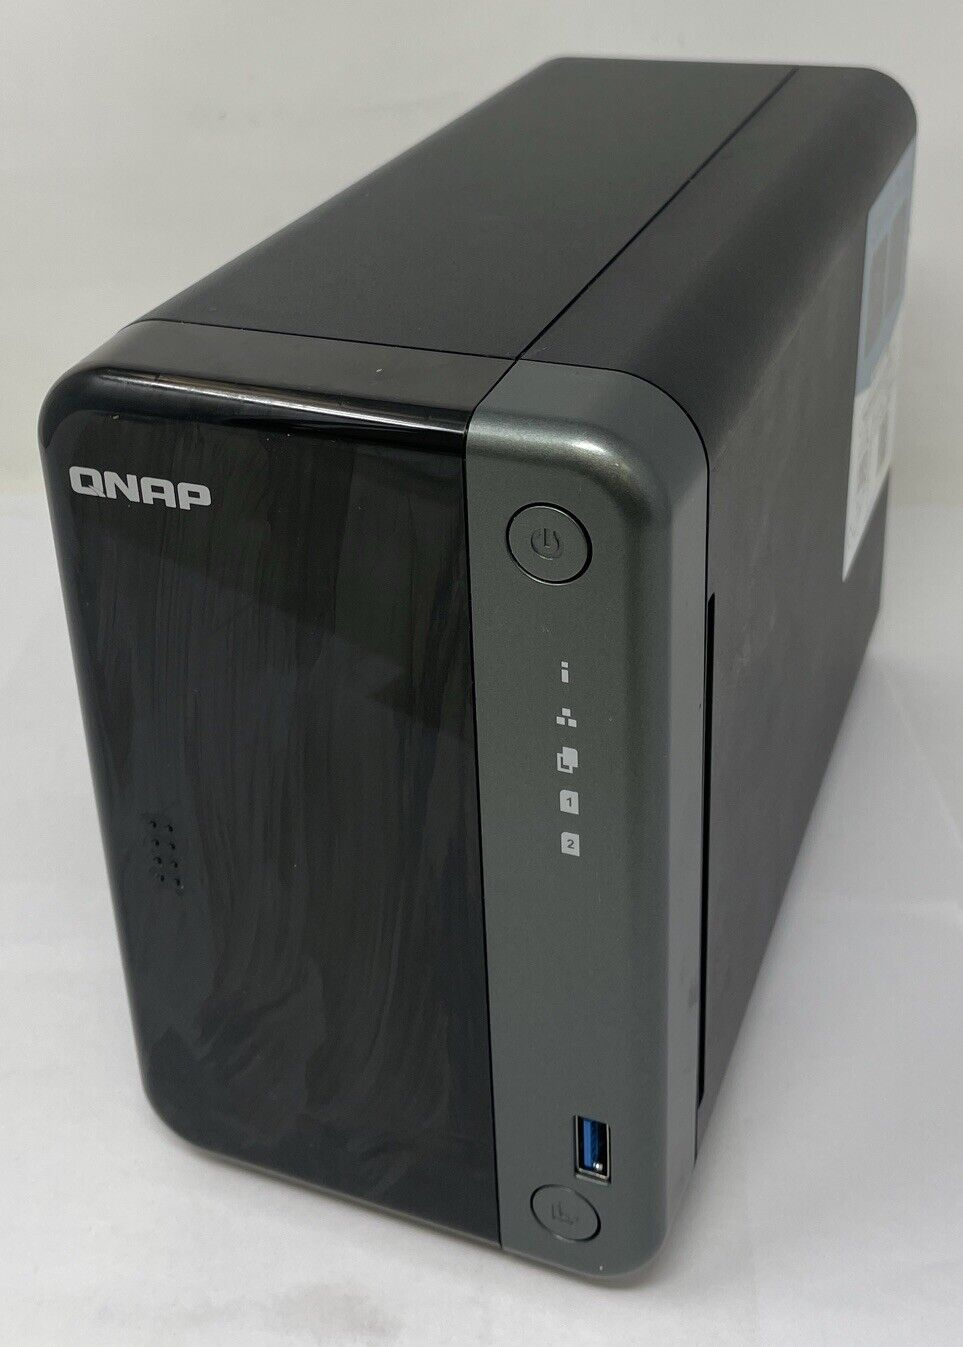 QNAP TS-253D-4G 2 Bay NAS - FOR PARTS - AS-IS